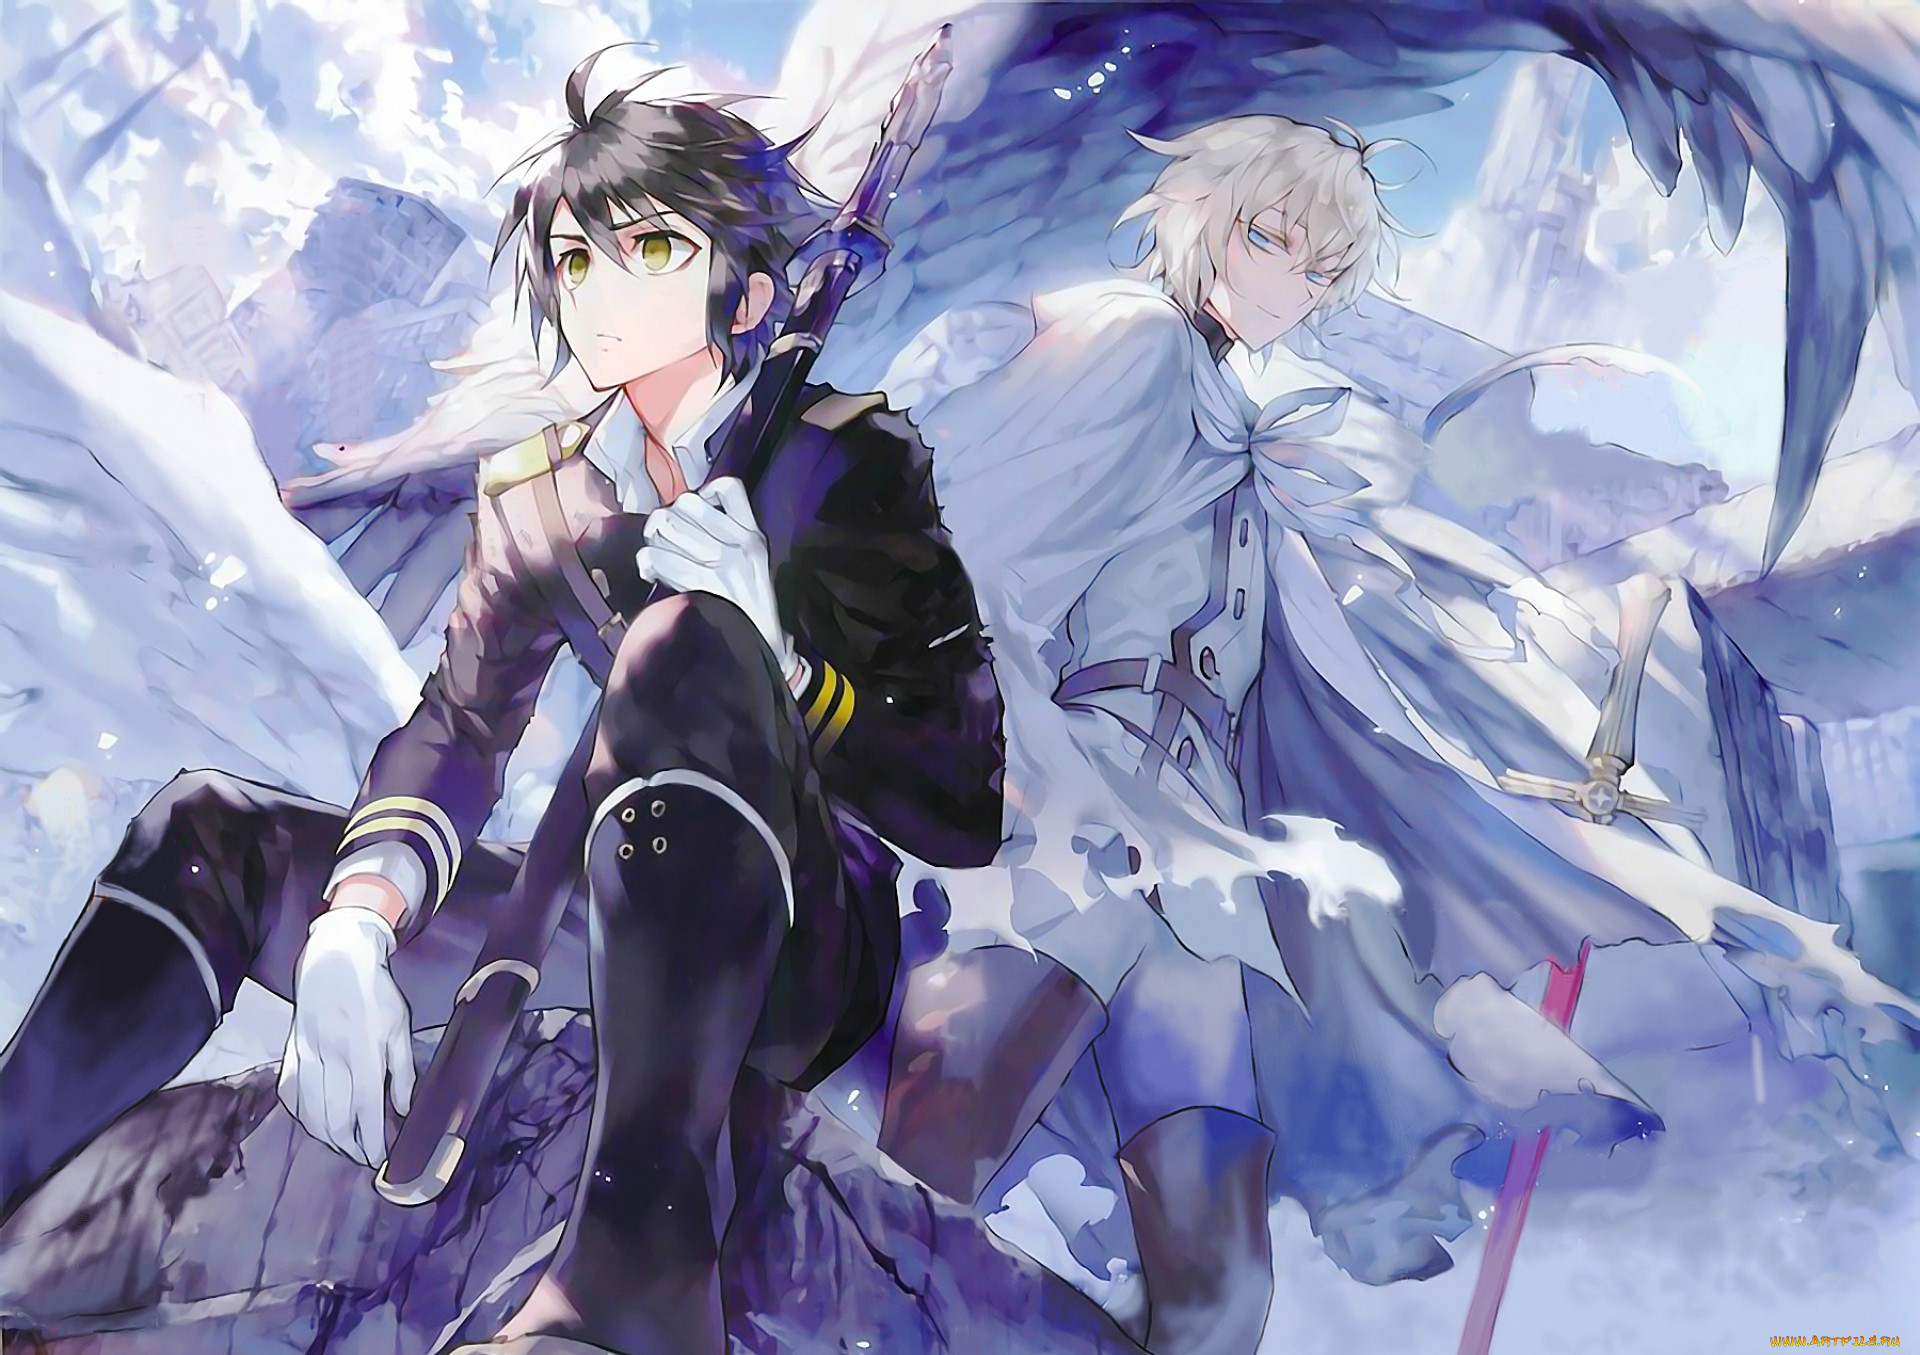 Seraph of the end official art